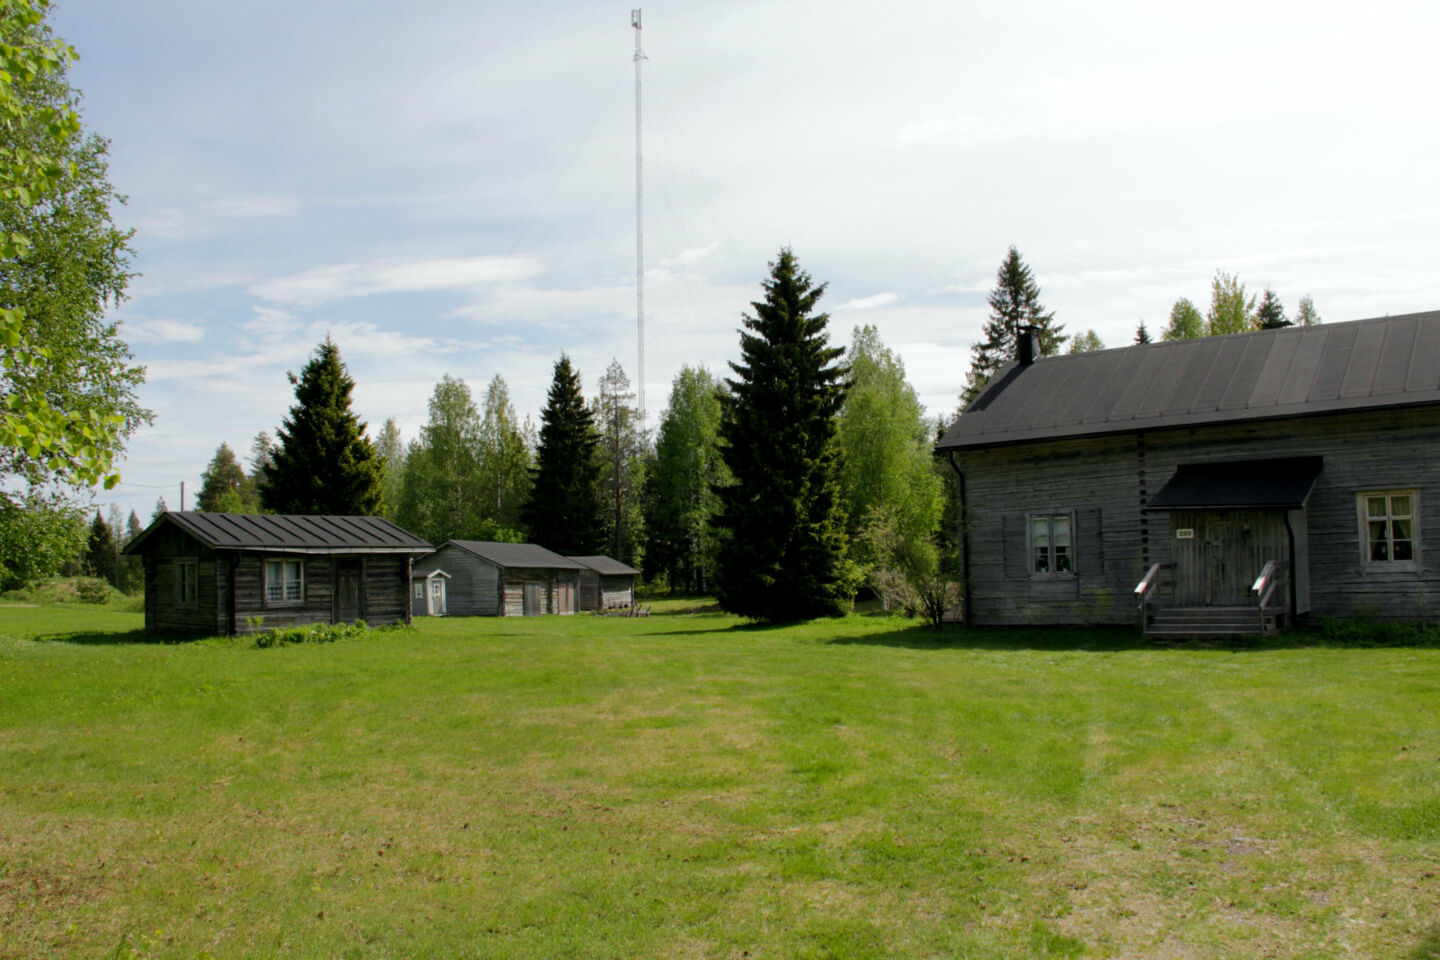 The buildings in summer at Hervanvaara in Ranua, a Finnish Lapland filming location